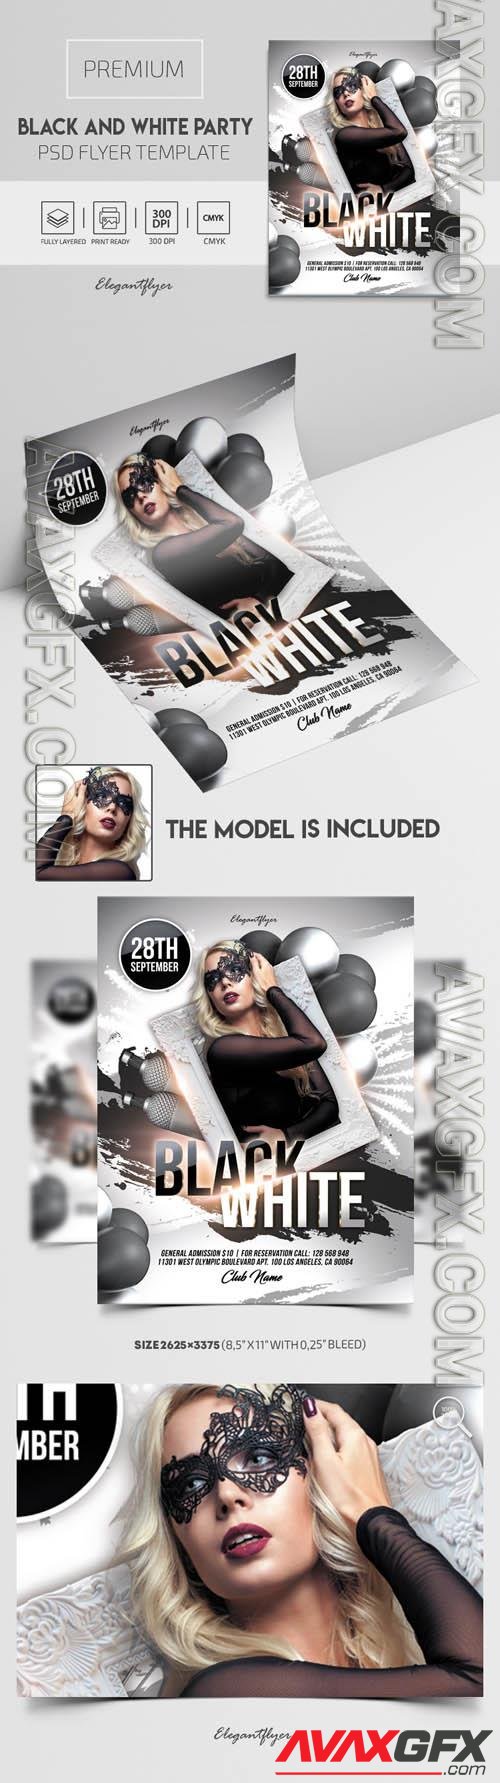 Black and White Party Flyer PSD Template